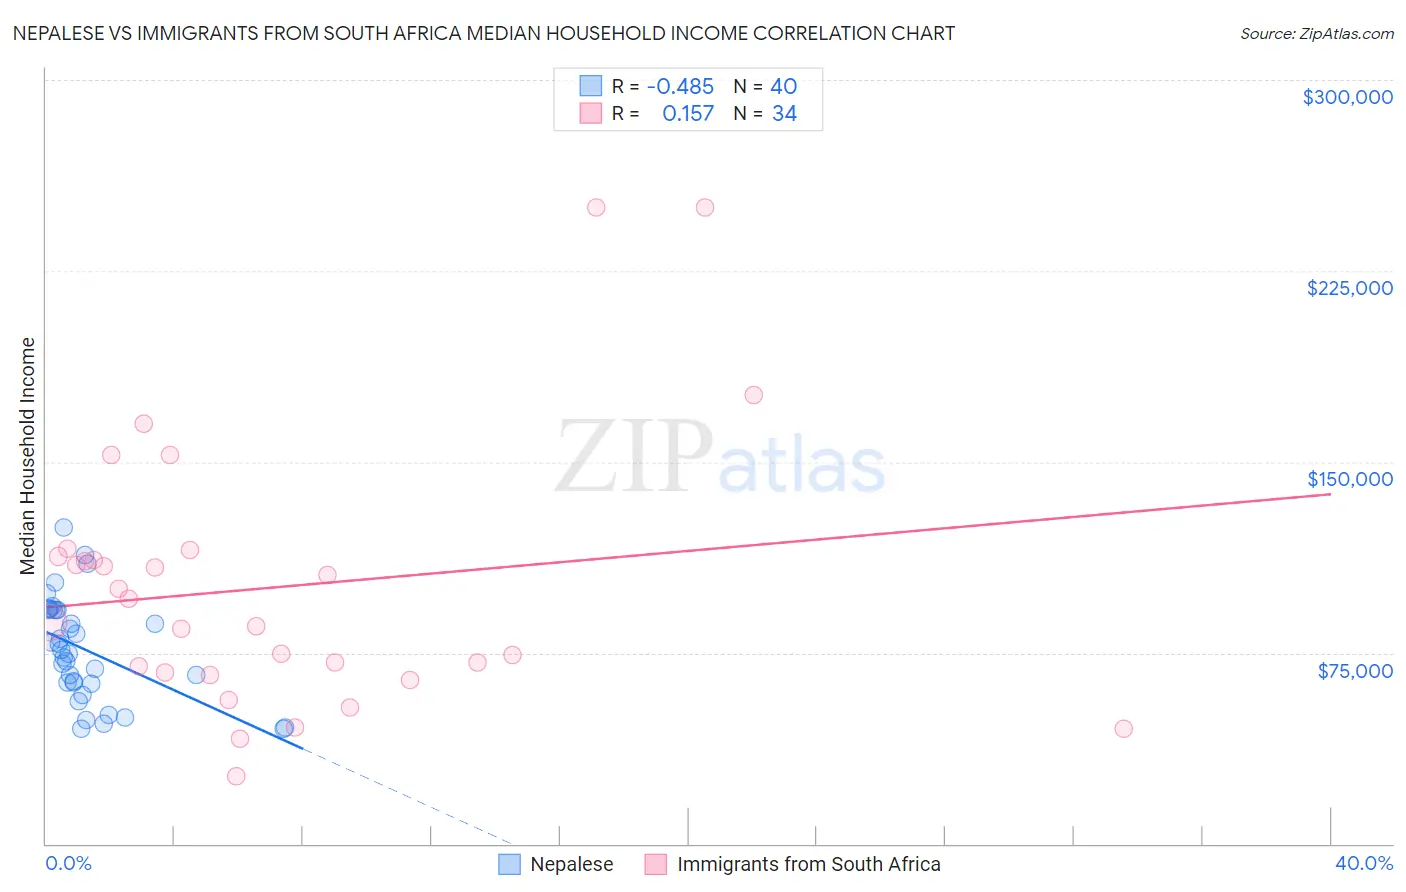 Nepalese vs Immigrants from South Africa Median Household Income